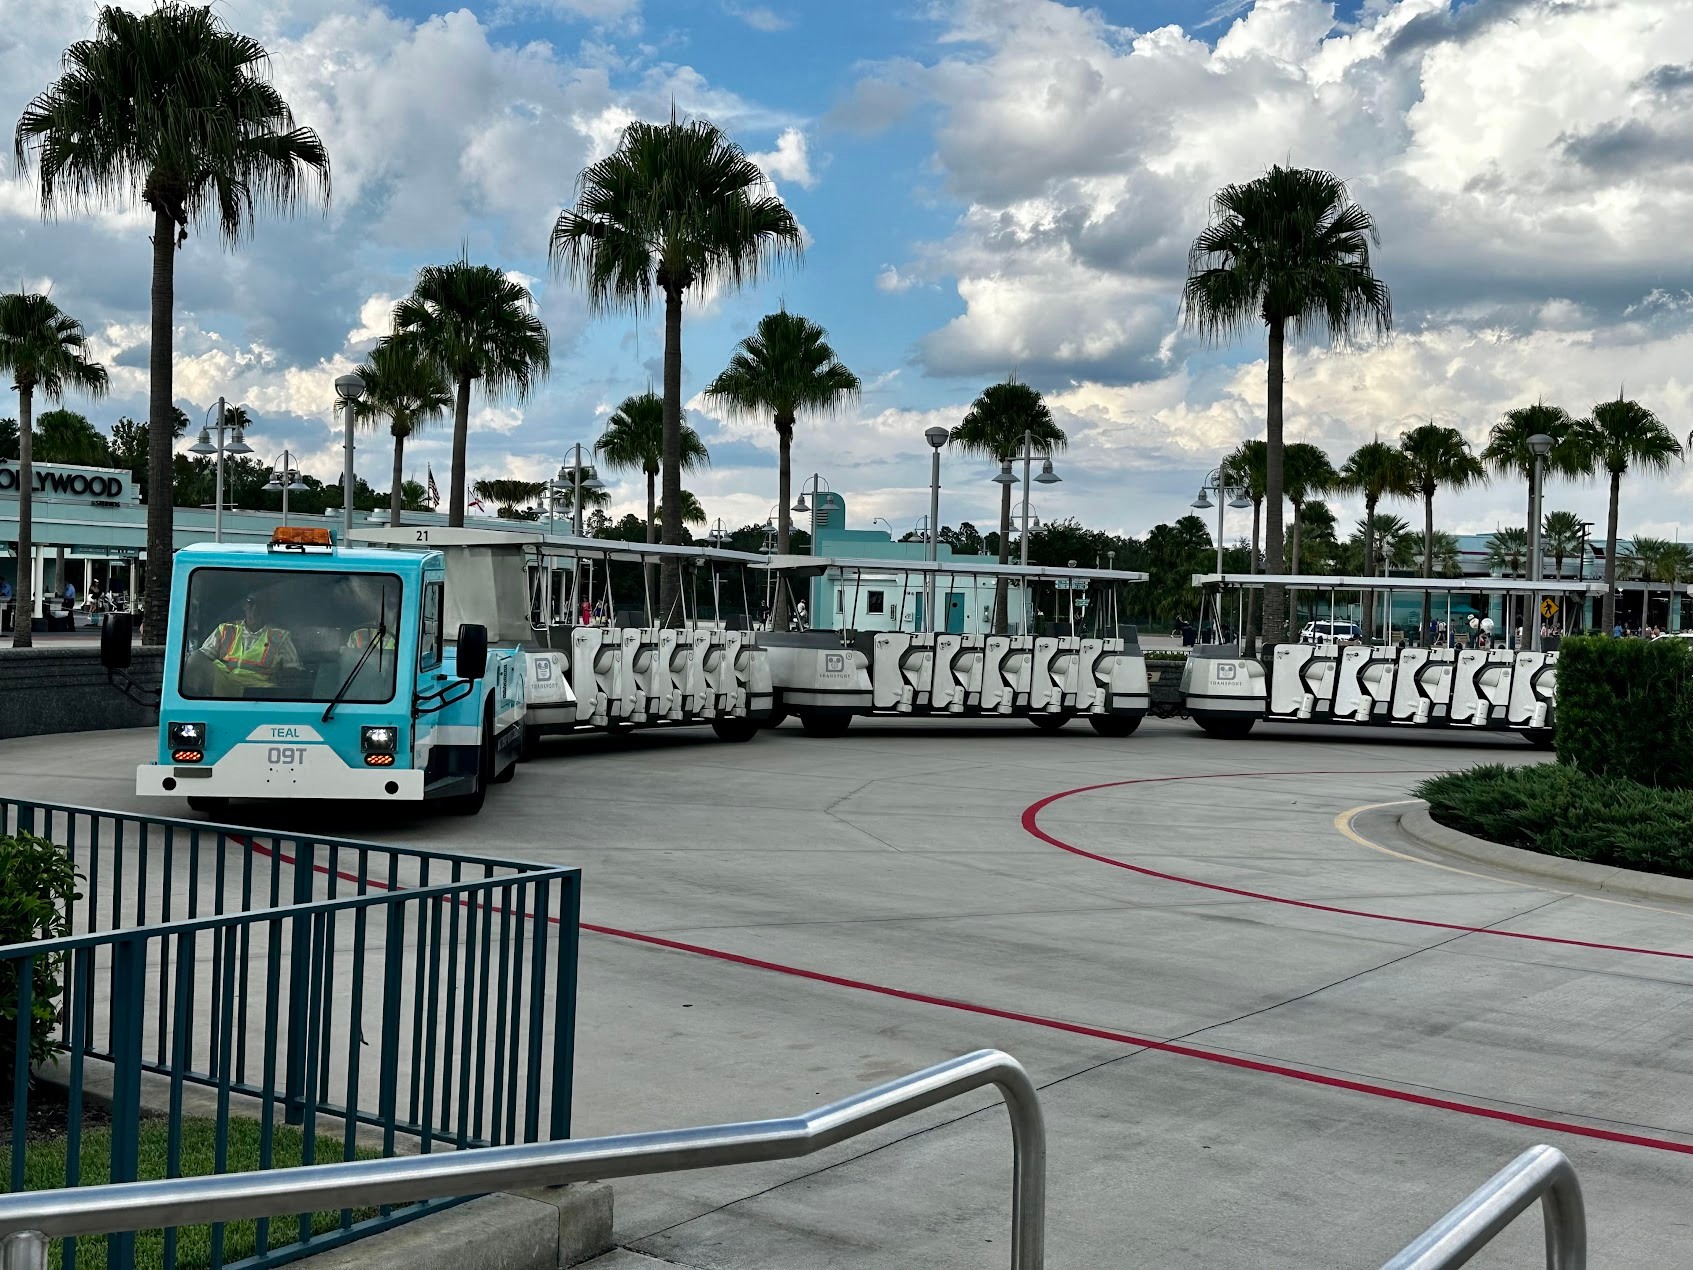 Disney's Parking Trams, Buses, and Monorails Get Updated - Orlando